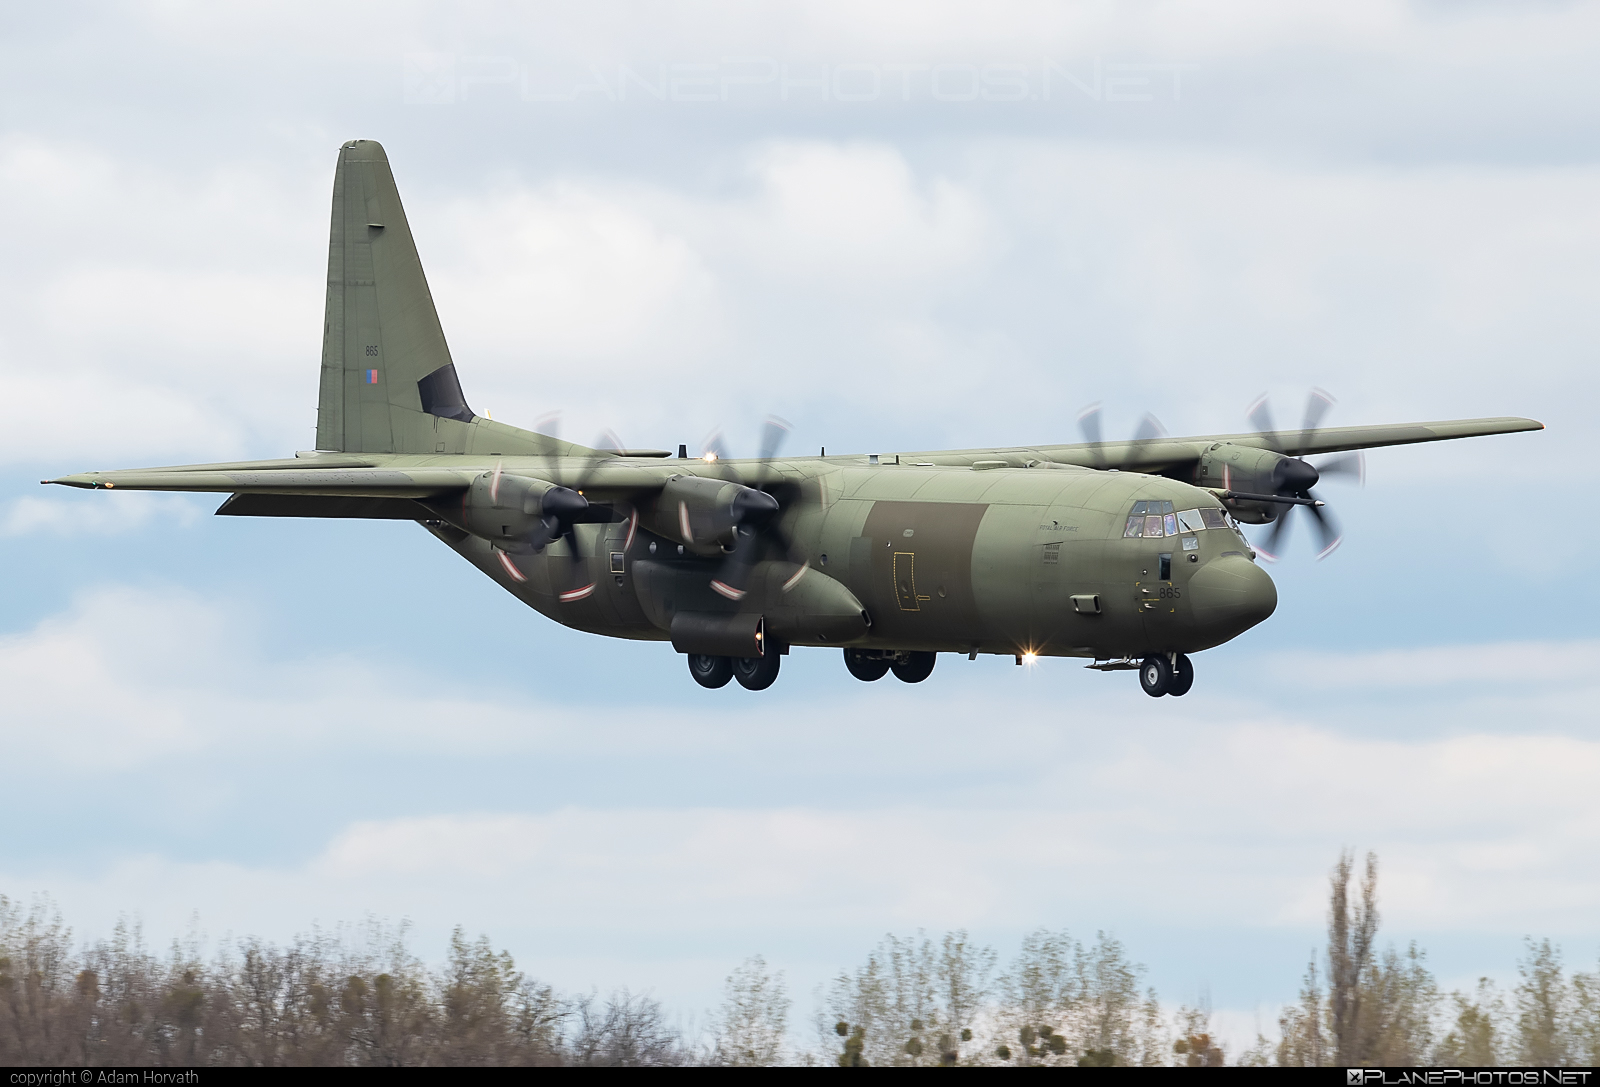 Lockheed Martin C-130J-30 Super Hercules - ZH865 operated by Royal Air Force (RAF) #BudapestFerencLisztInt #c130 #c130j #c130j30 #lockheedMartin #raf #royalAirForce #superhercules